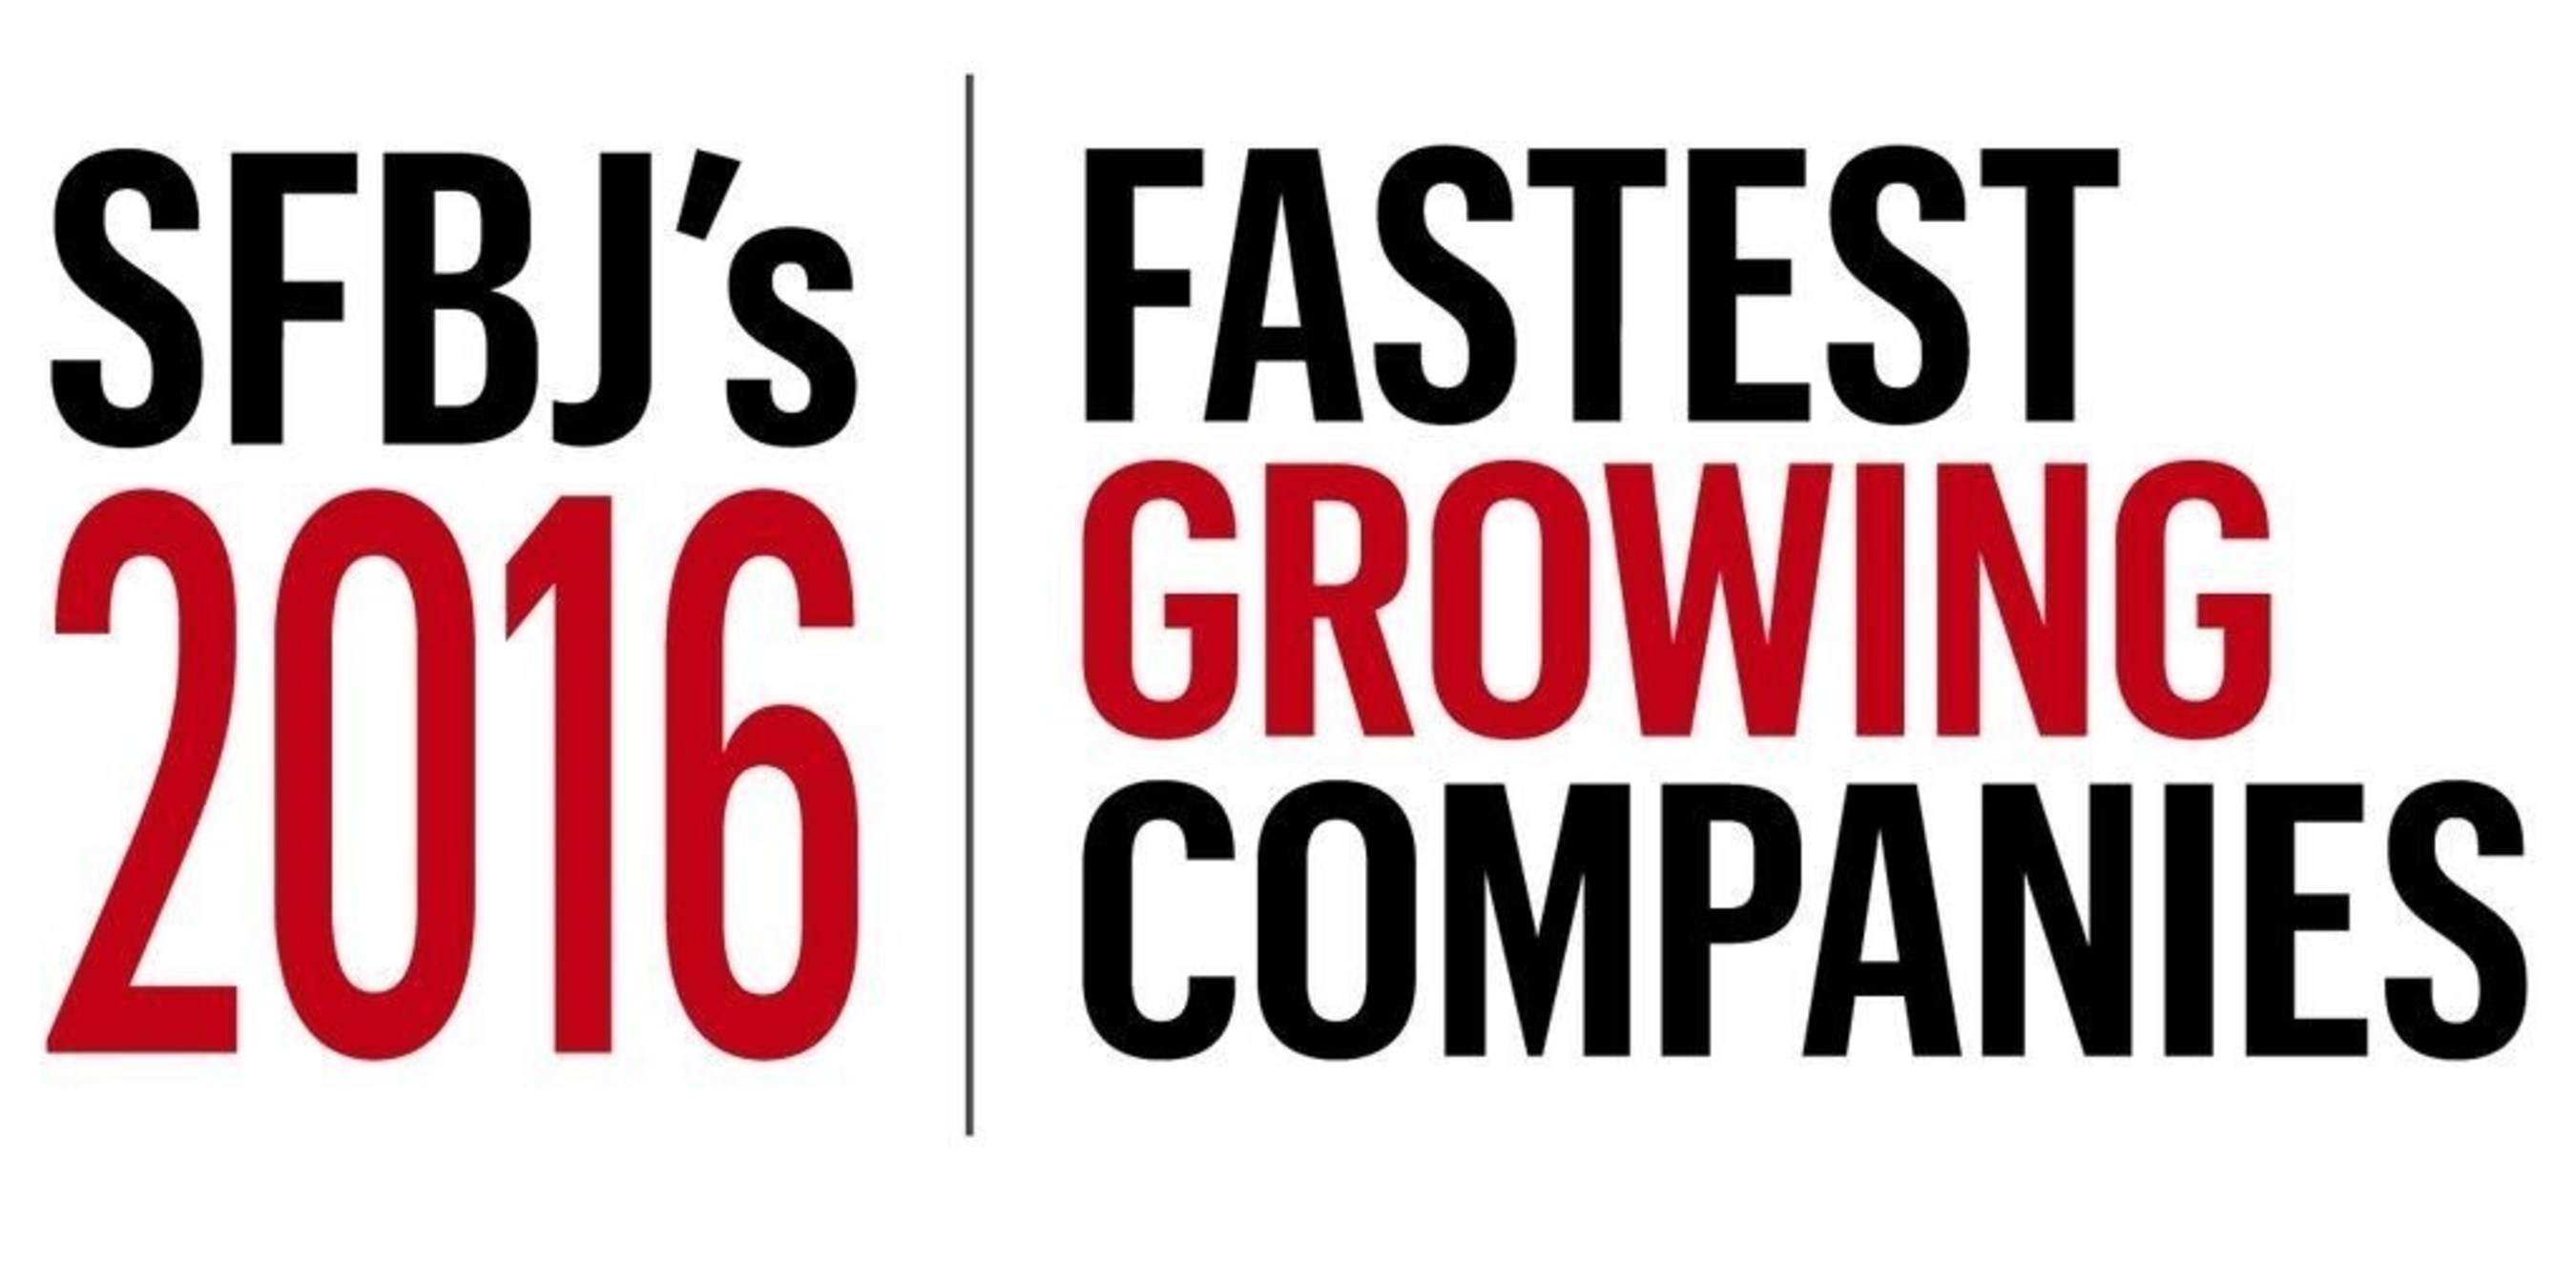 The South Florida Business Journal's Fast 50 Awards rank the 50 fastest growing private companies in South Florida, with Tint World(R) coming in at number 24 for the under $25 million category.